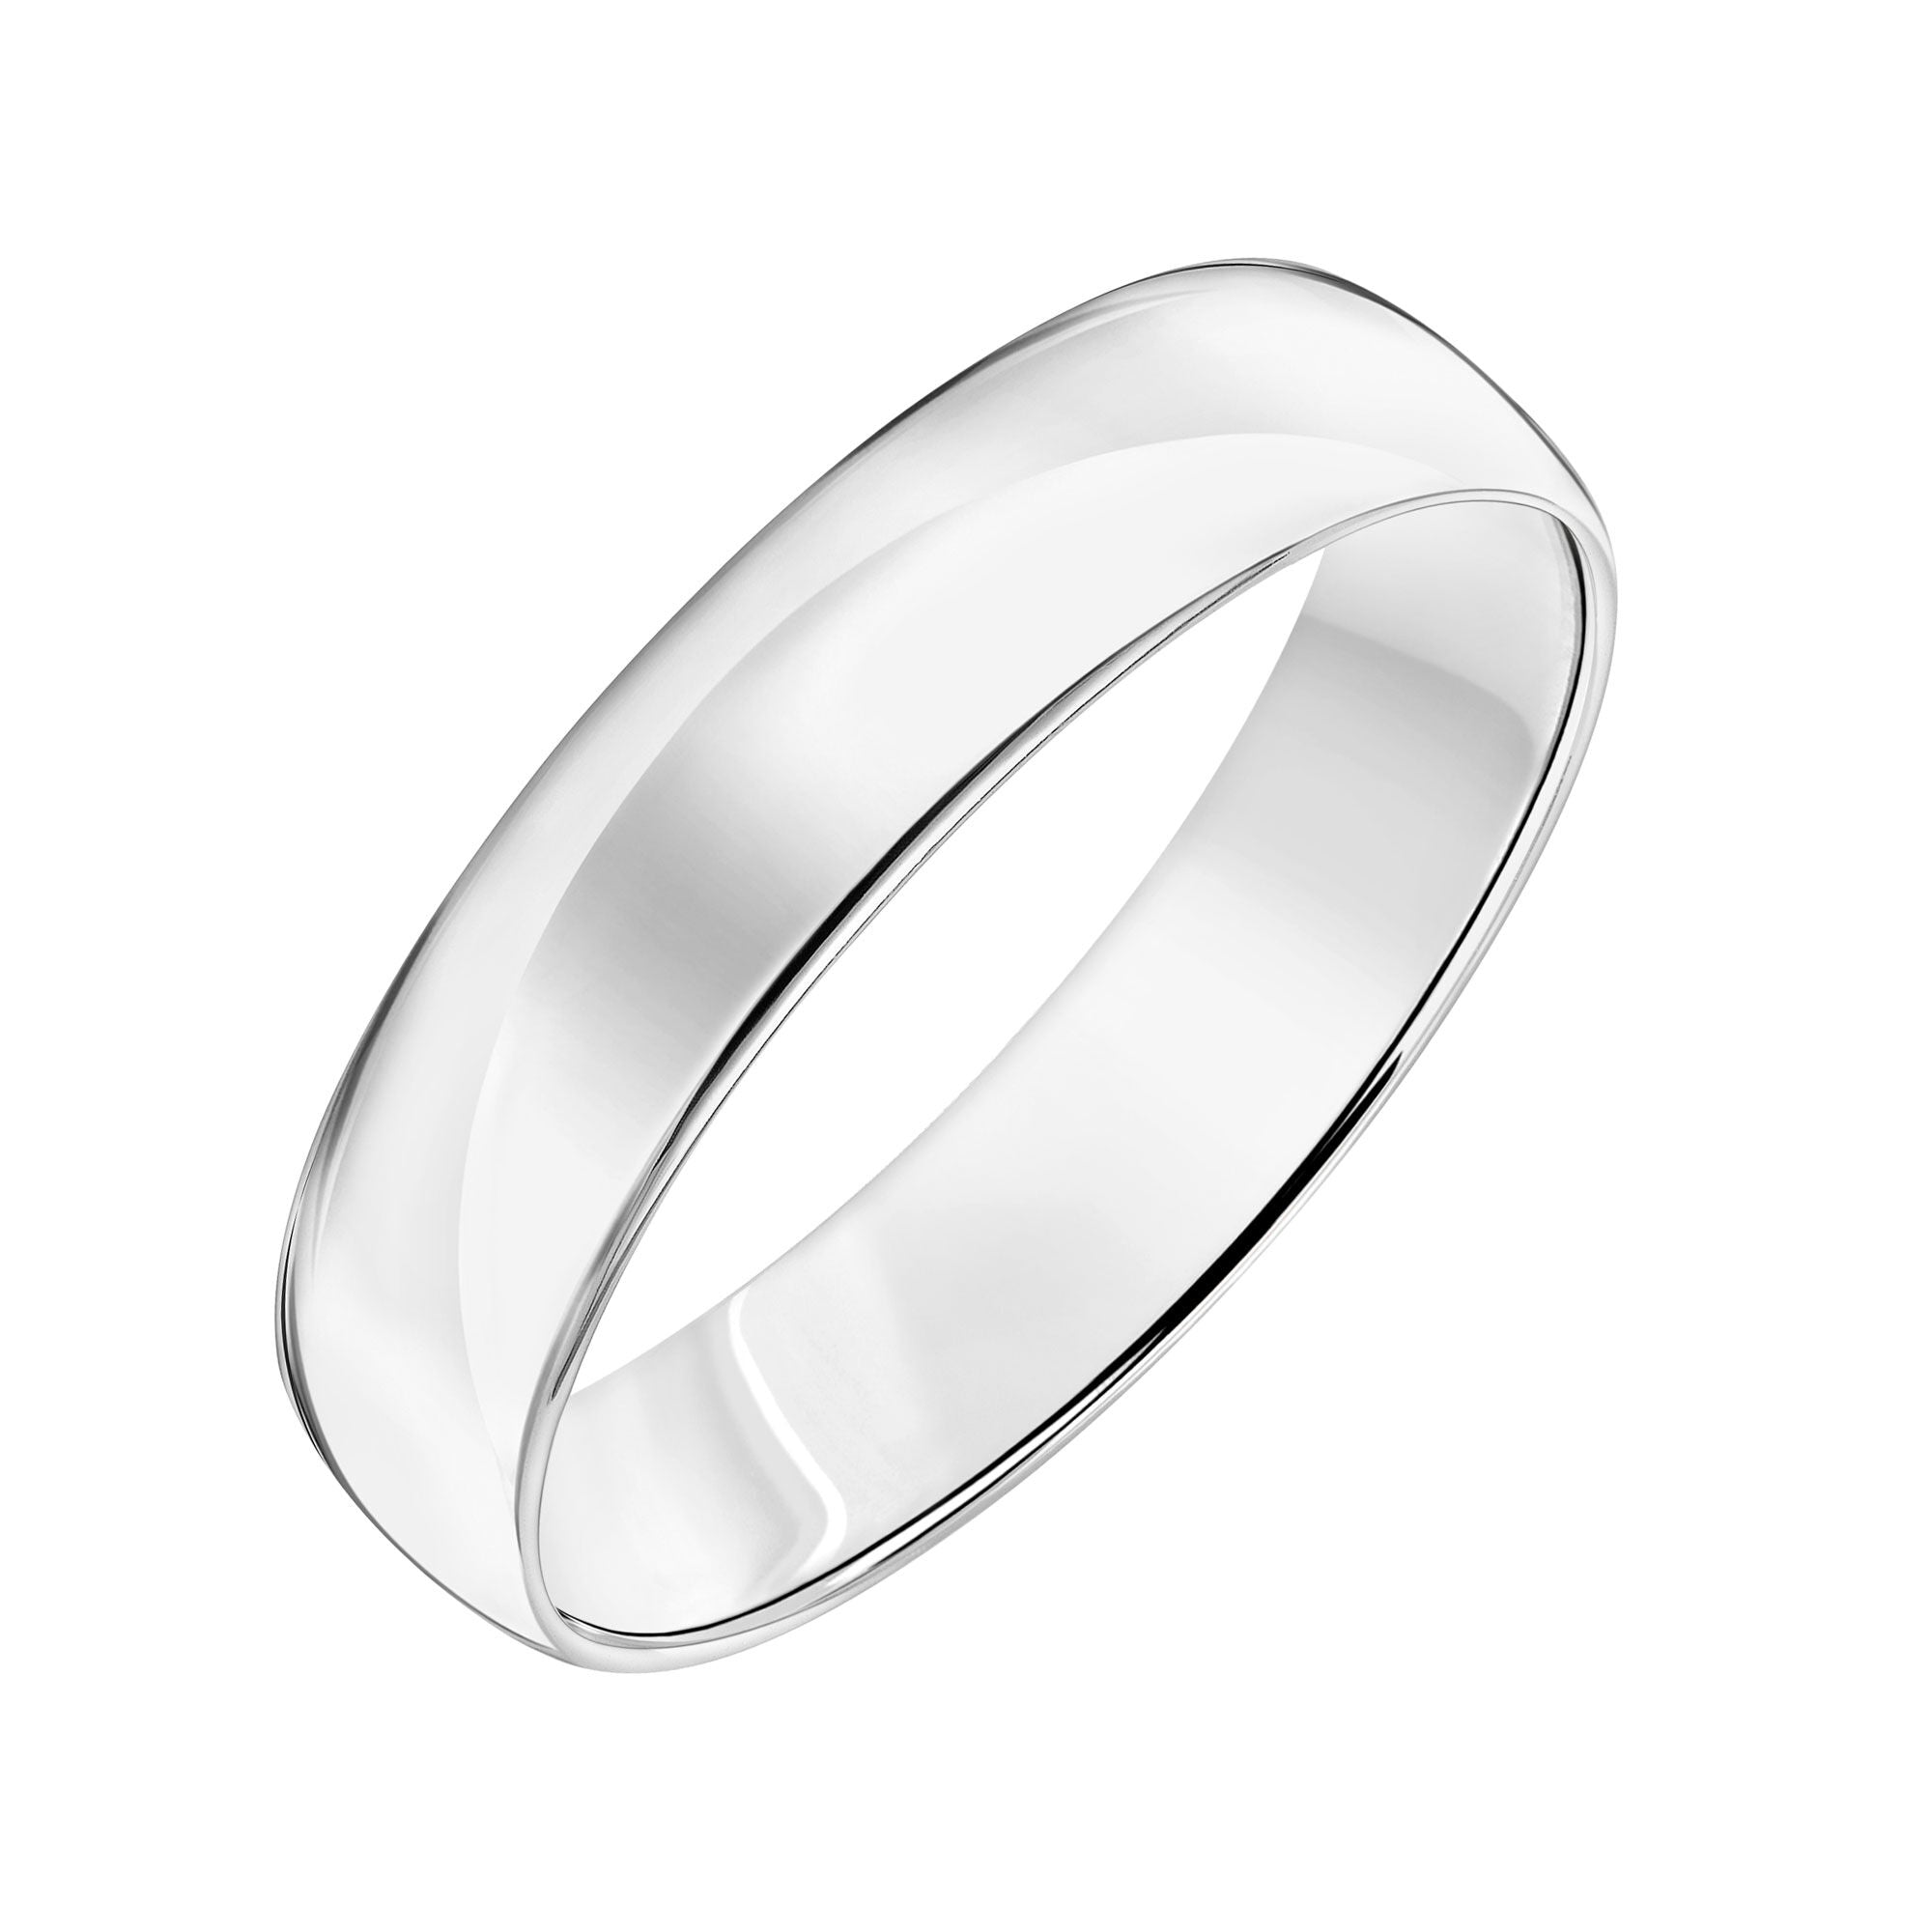 Euro Dome Comfort Fit Wedding Ring Men's Band in Platinum 5mm - UB568